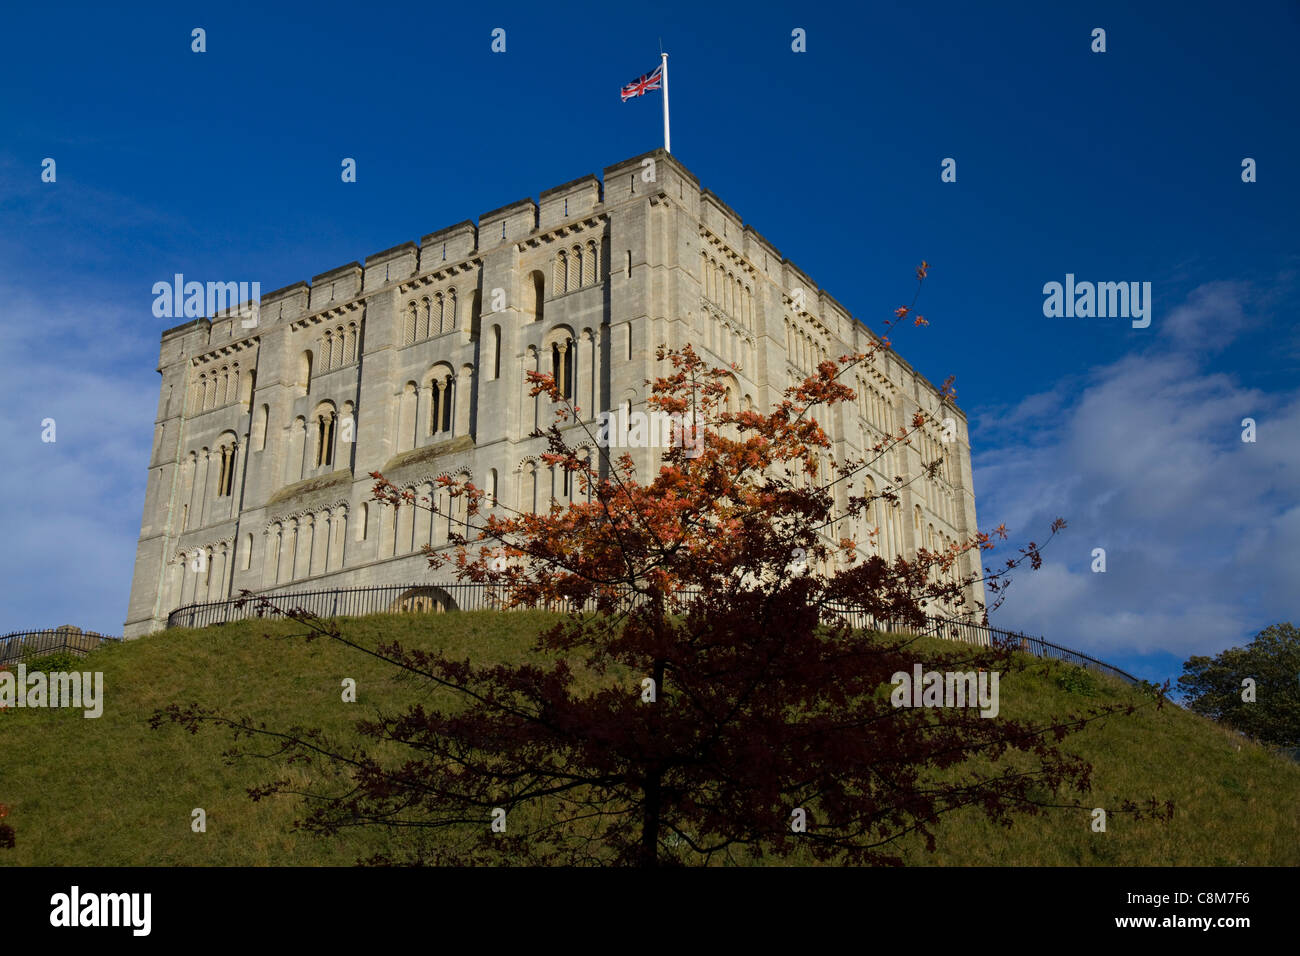 The magnificent edifice of the Norman Castle in Norwich, Norfolk, England Stock Photo